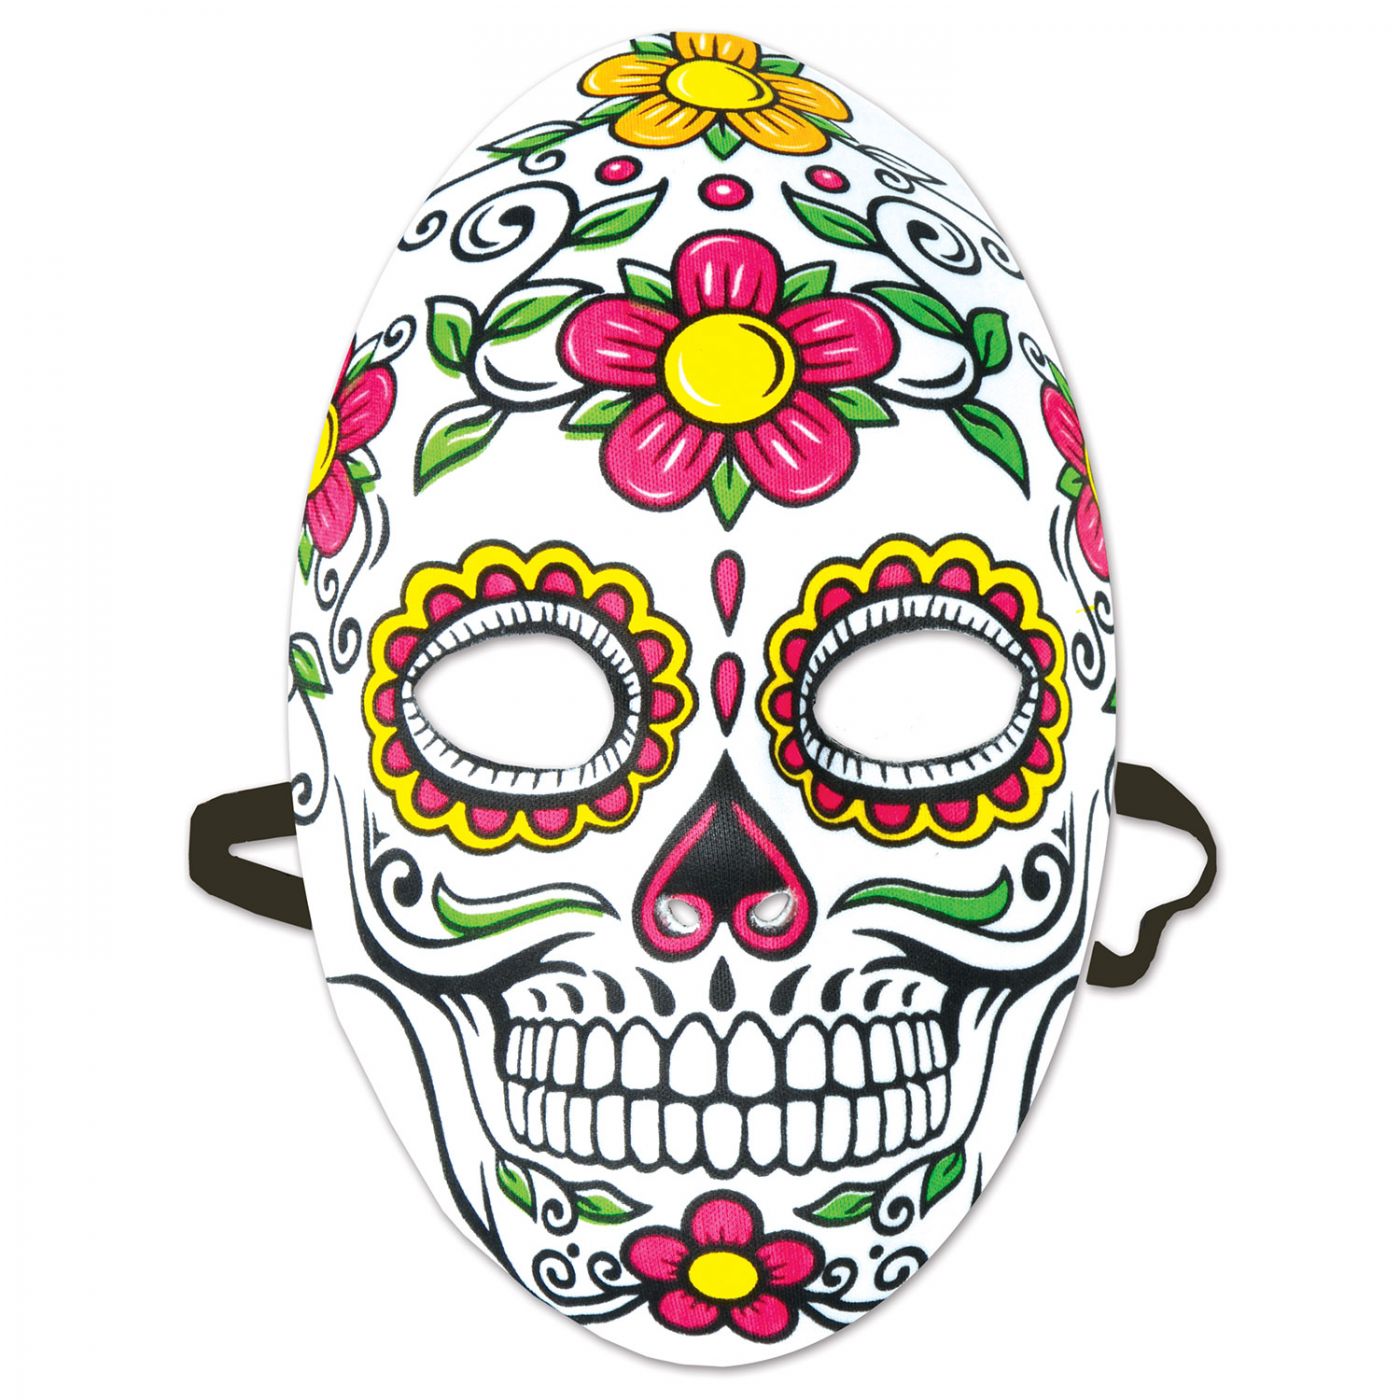 Day Of The Dead Mask image